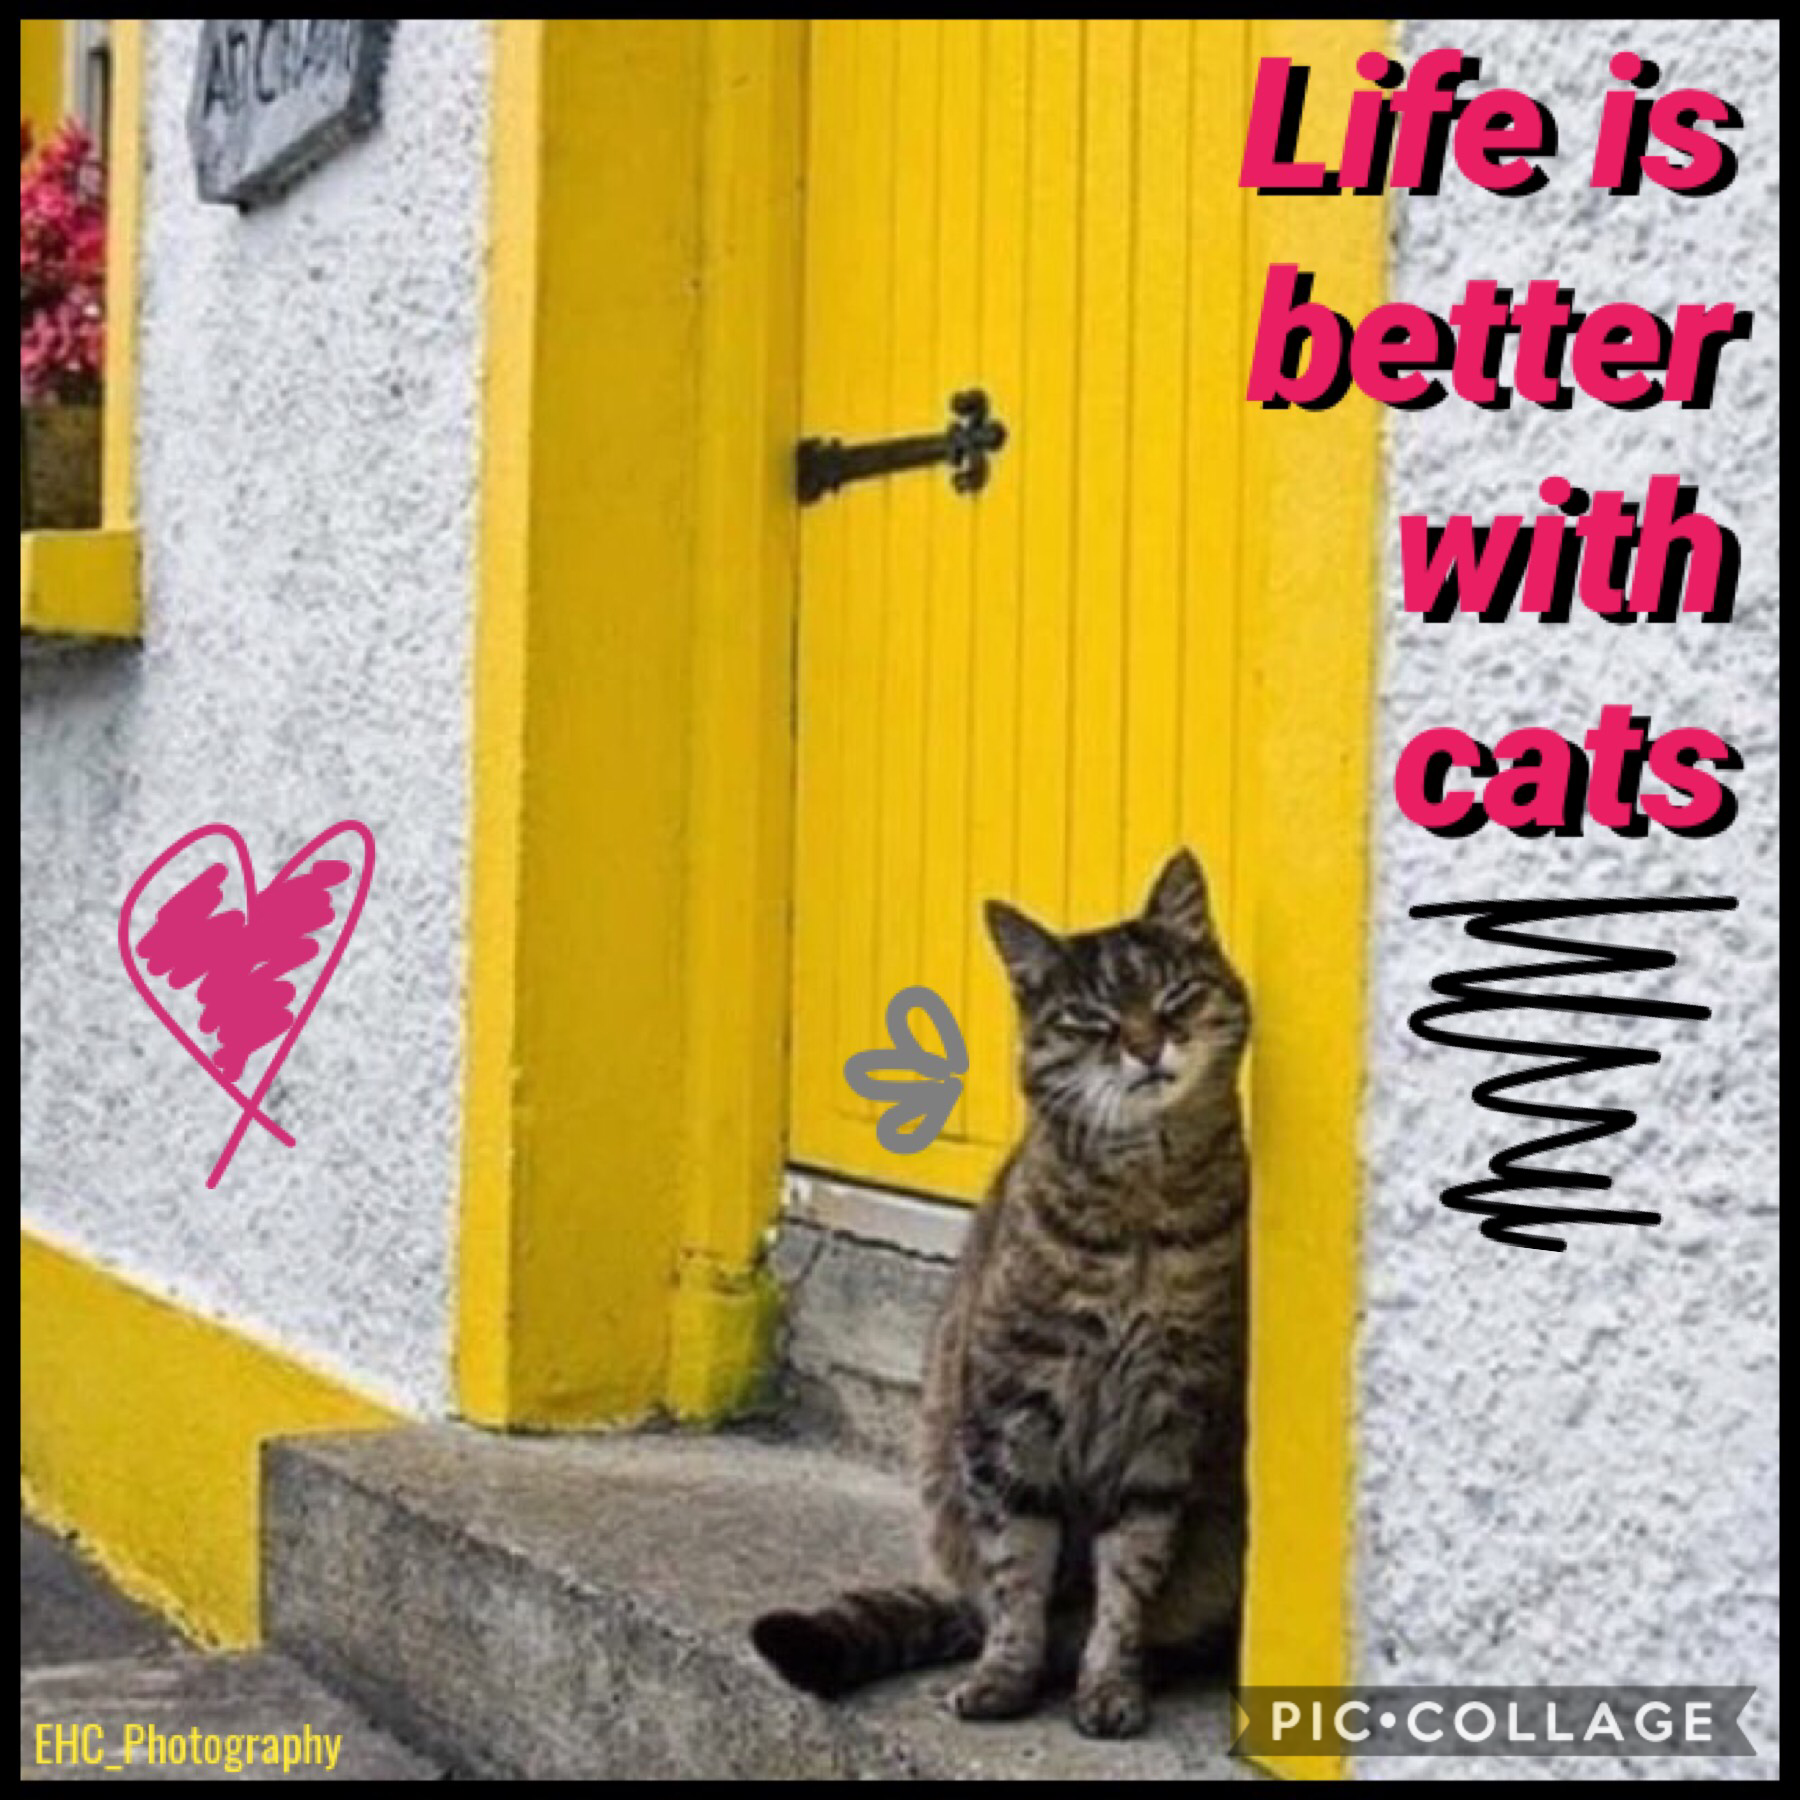 Happy International Cat Day! 😺 💖🚪I made this a while ago. 😻 It’s also Bowling Day! 🎳 QOTD: Do you have a cat? 🐈 AOTD: Yas, we have 3. 😽 Don’t have anything else to say... 😹 